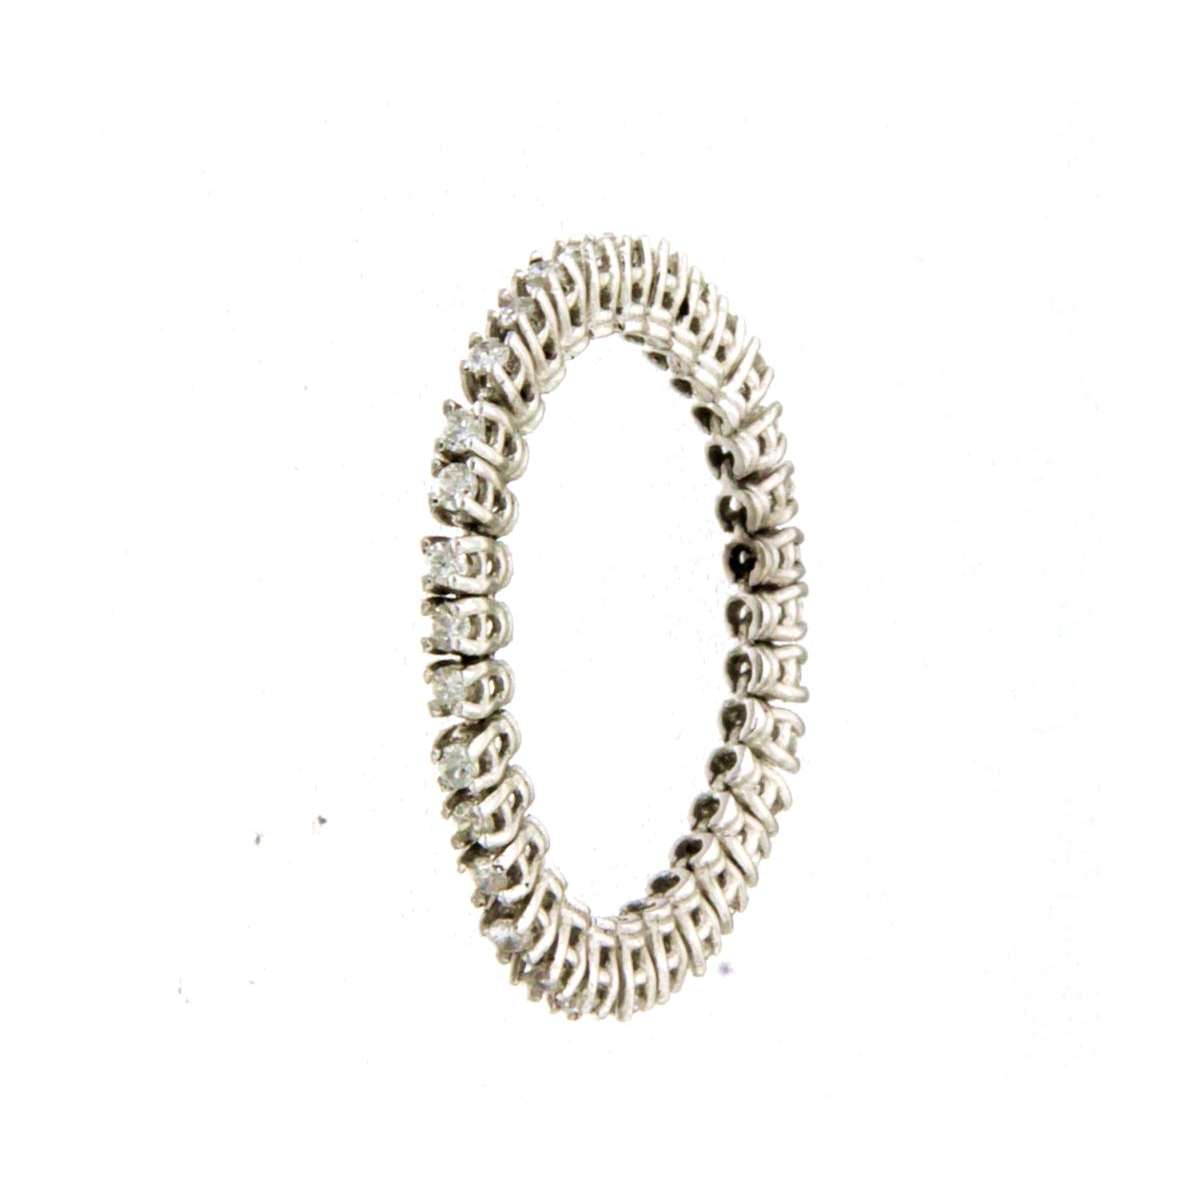 White gold articulated eternity ring 0.41 carats diamonds G Color VS1 Clarity